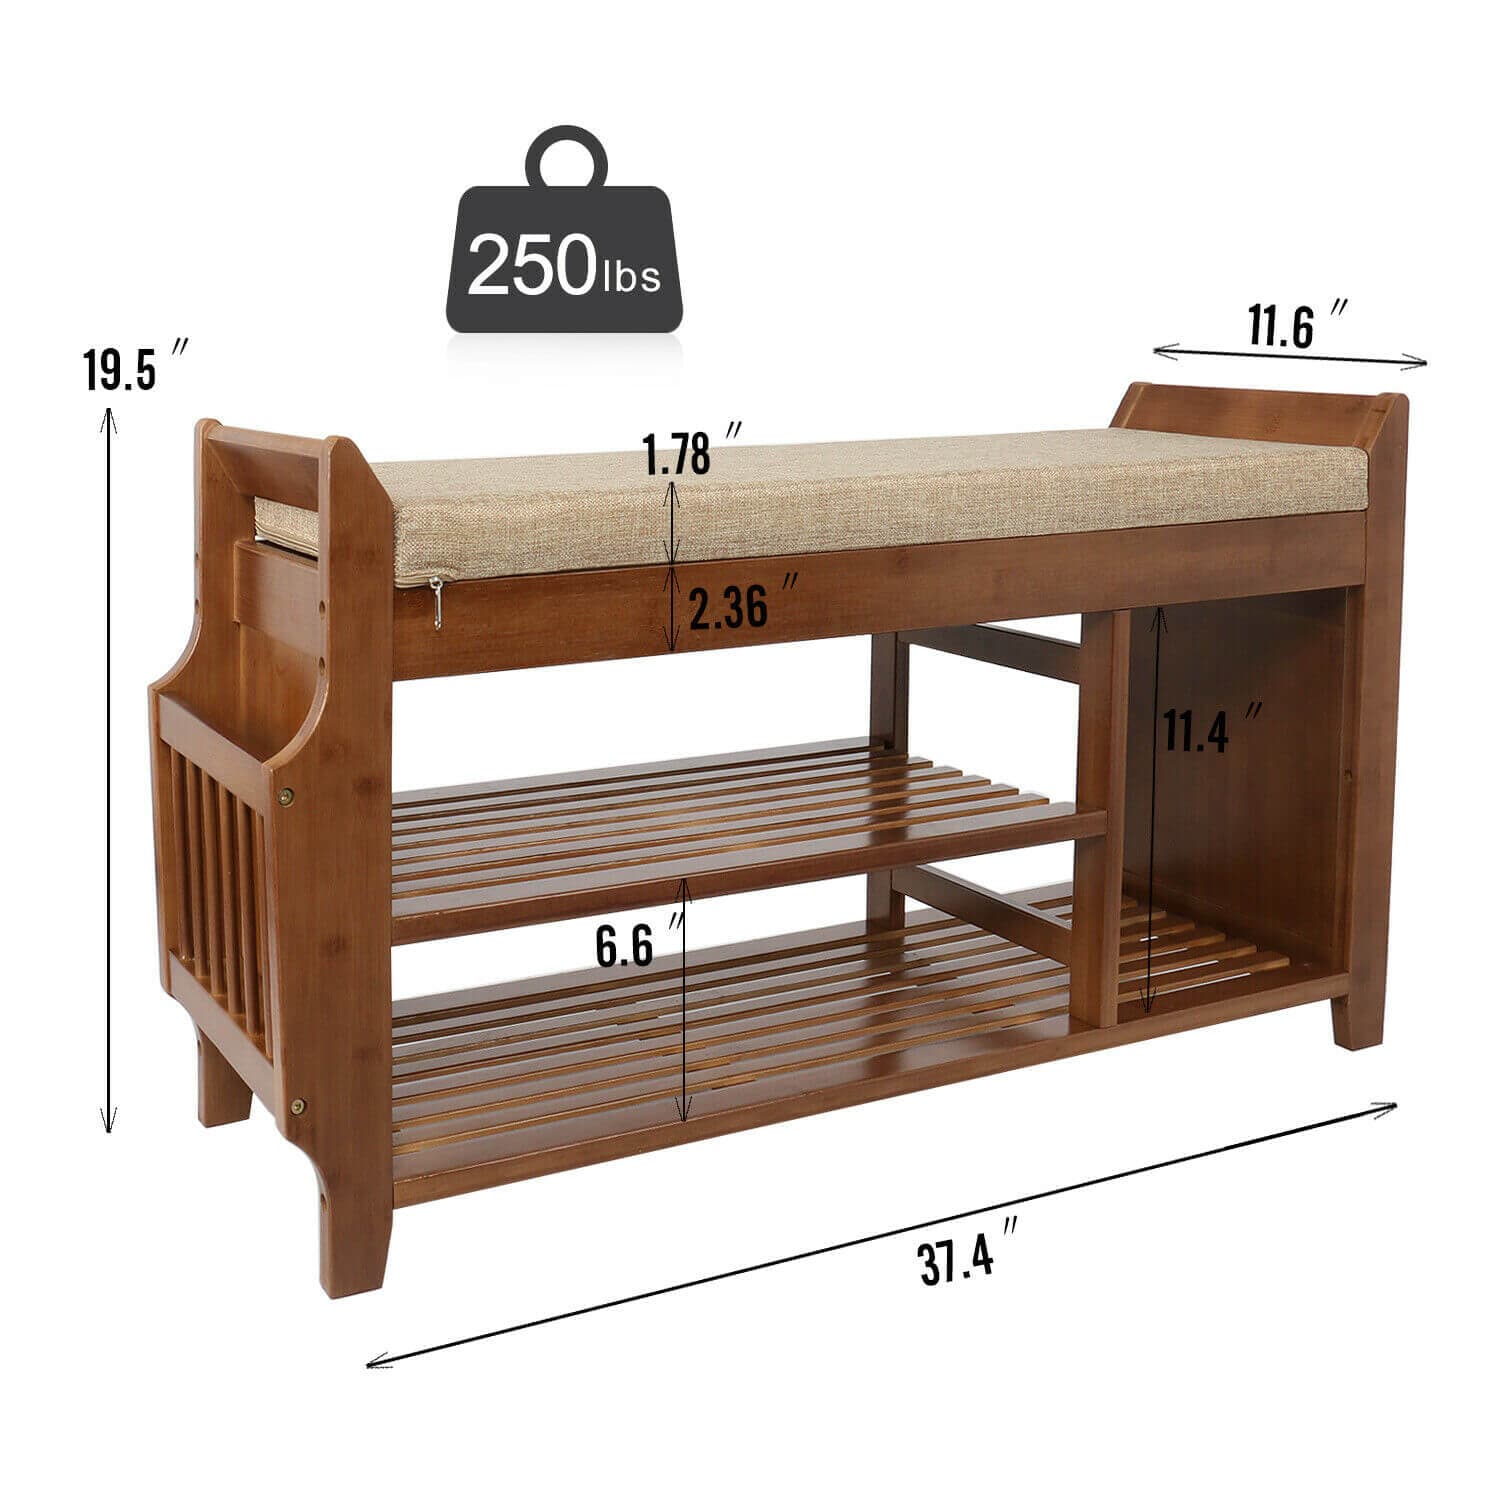 6-Pair Capacity Red-Brown Bamboo Shoe Bench with Hidden Storage